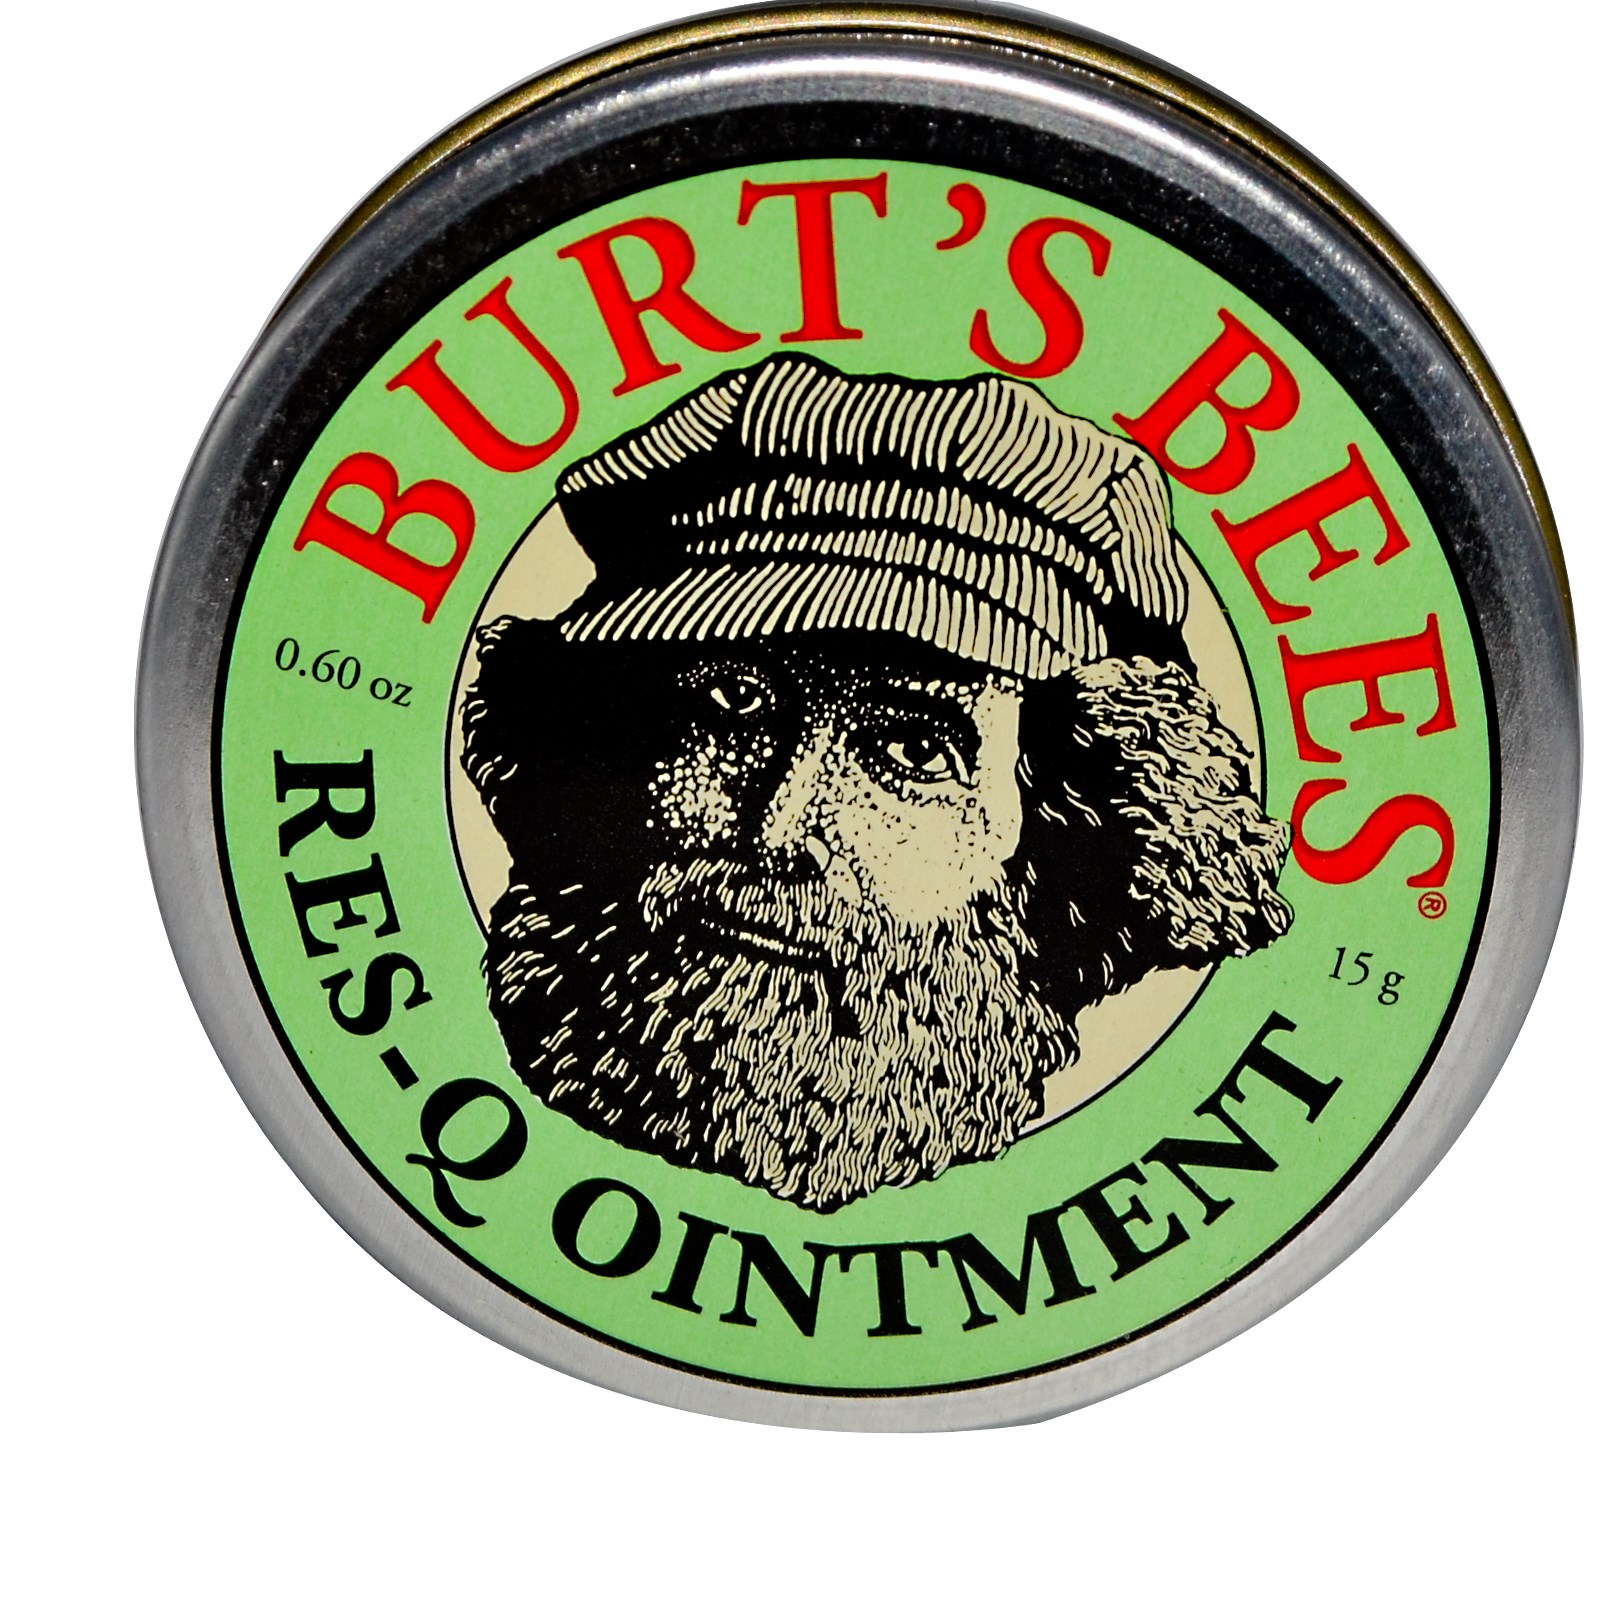 Burt´s Bees Res-Q Ointment